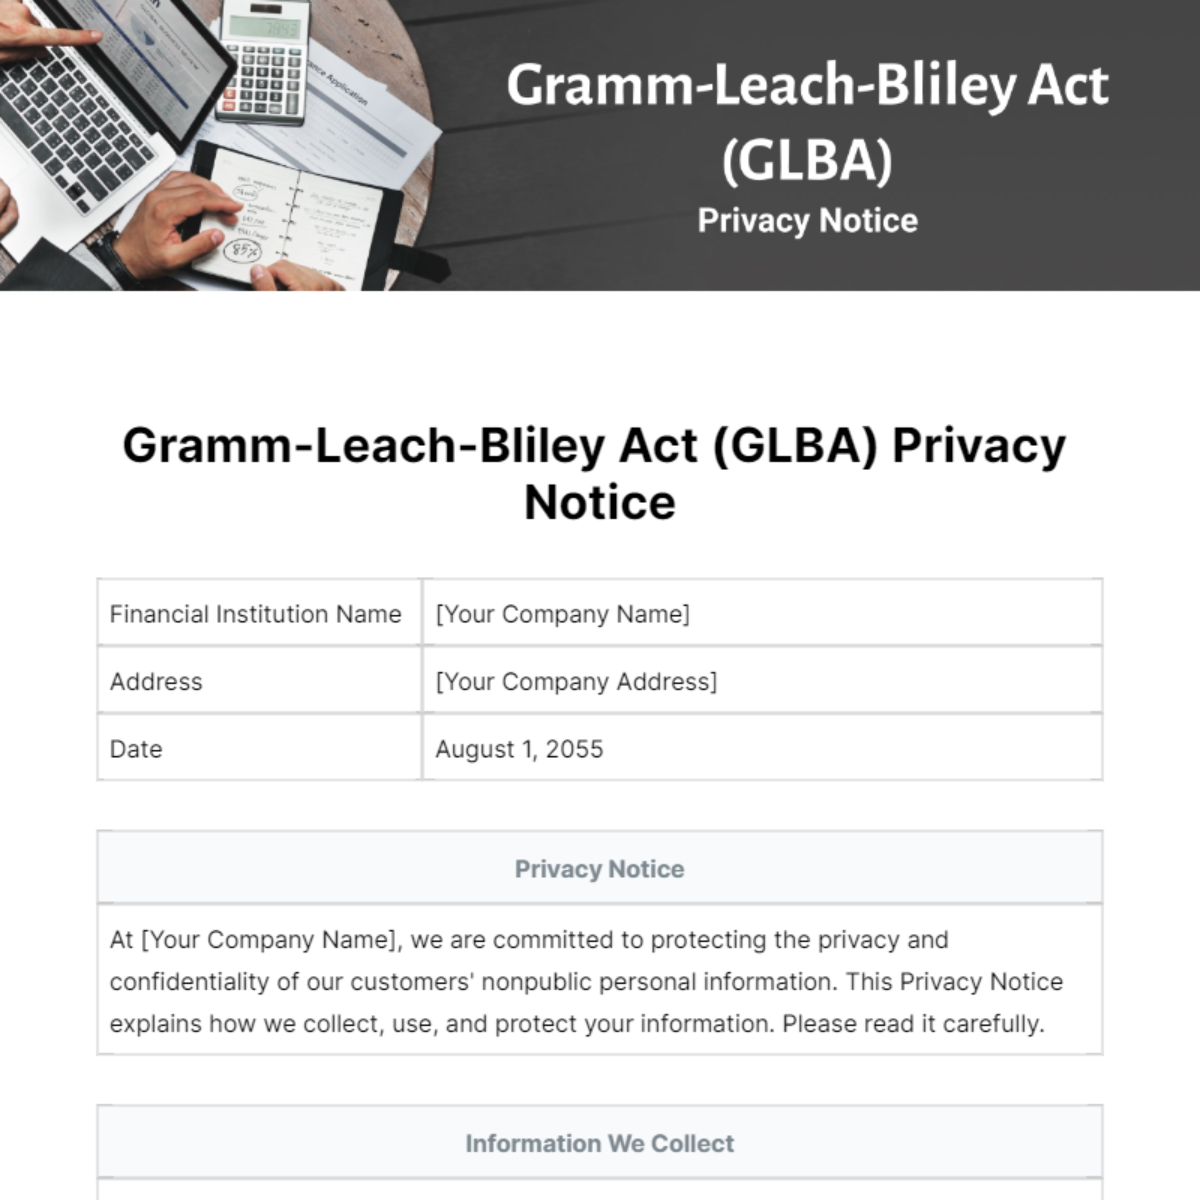 Gramm-Leach-Bliley Act (GLBA) Privacy Notice Template